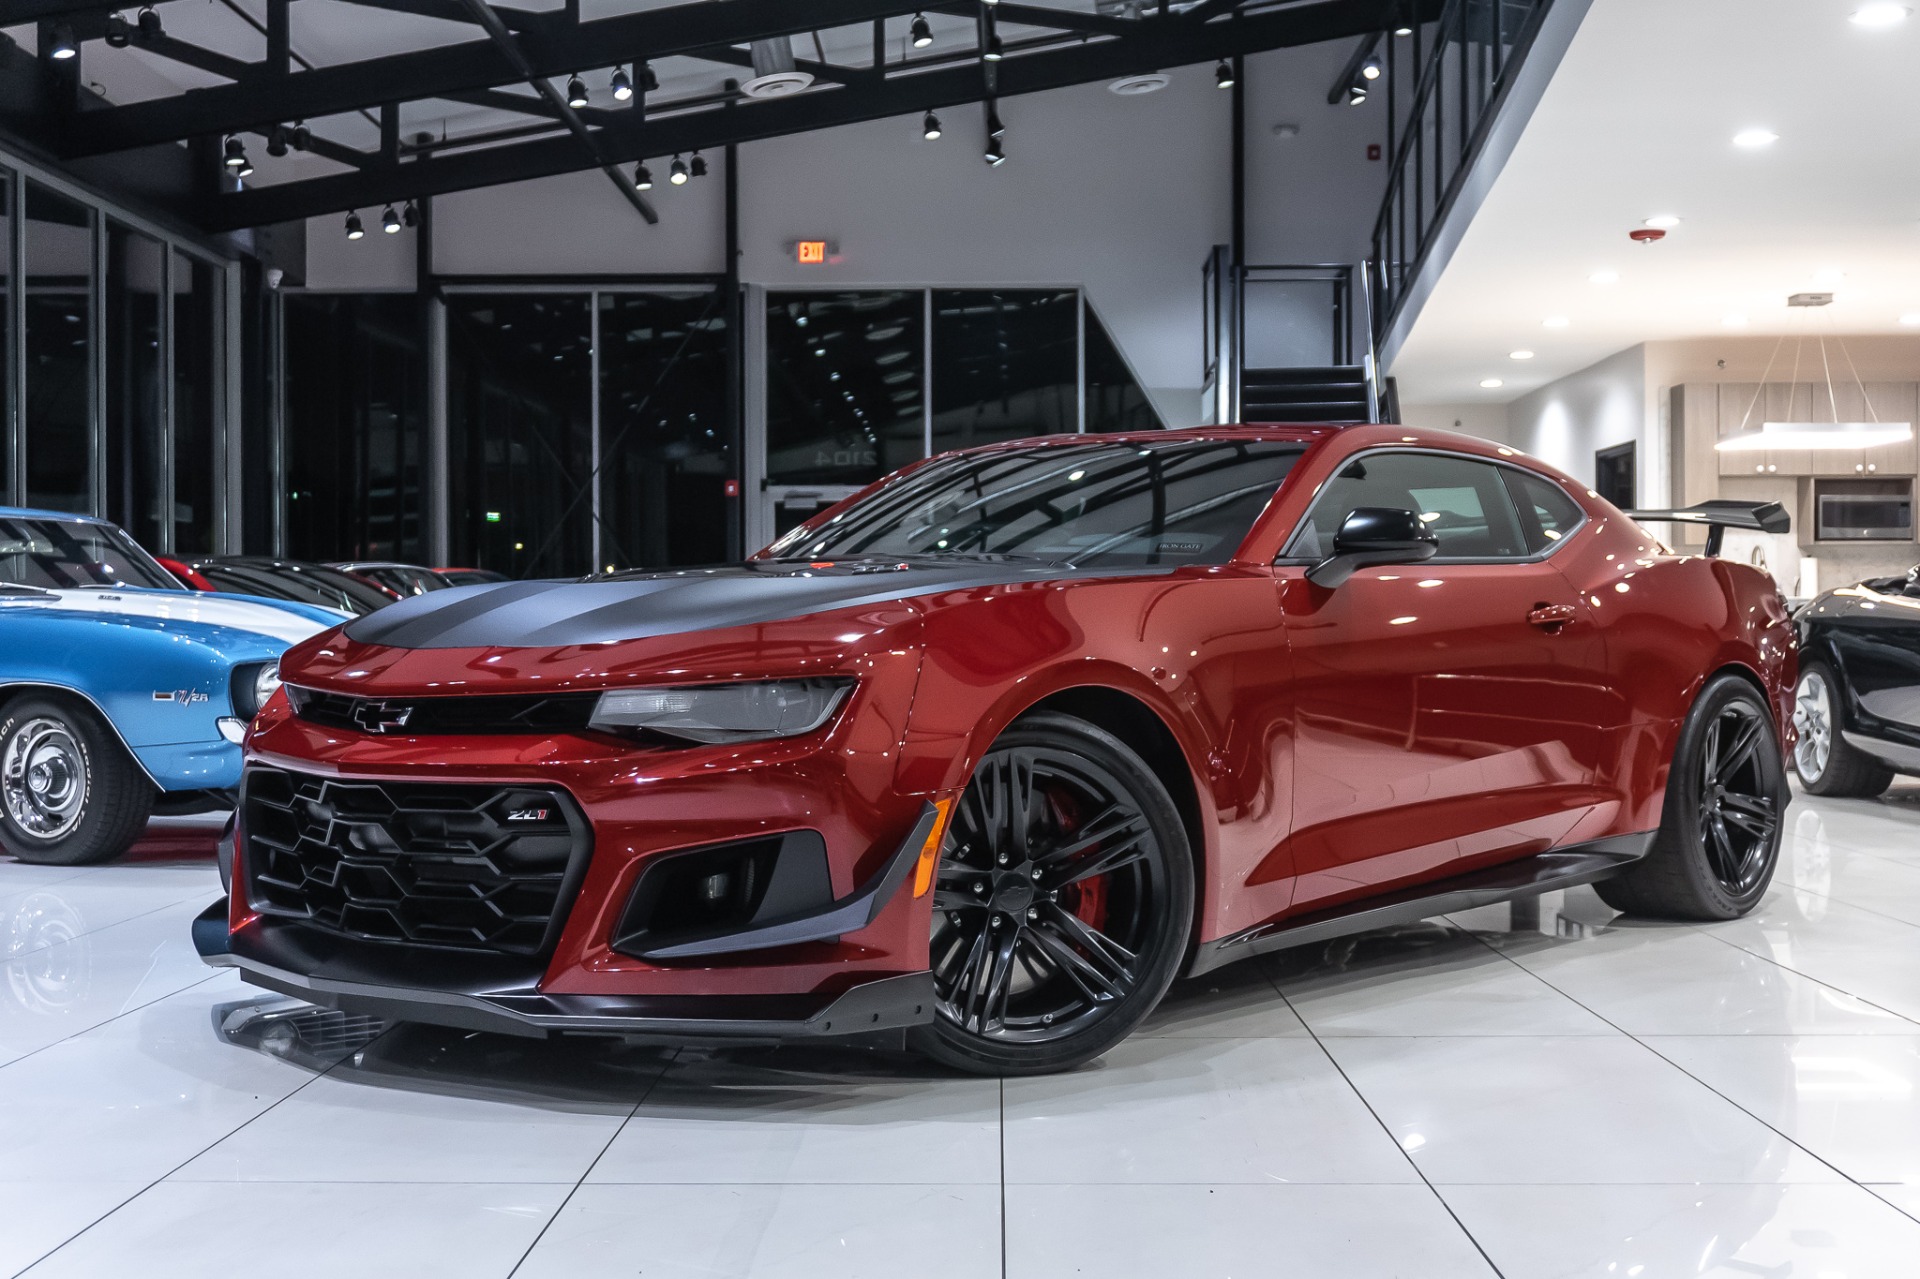 Used 2019 Chevrolet Camaro ZL1 1LE ONLY 161 MILES! For